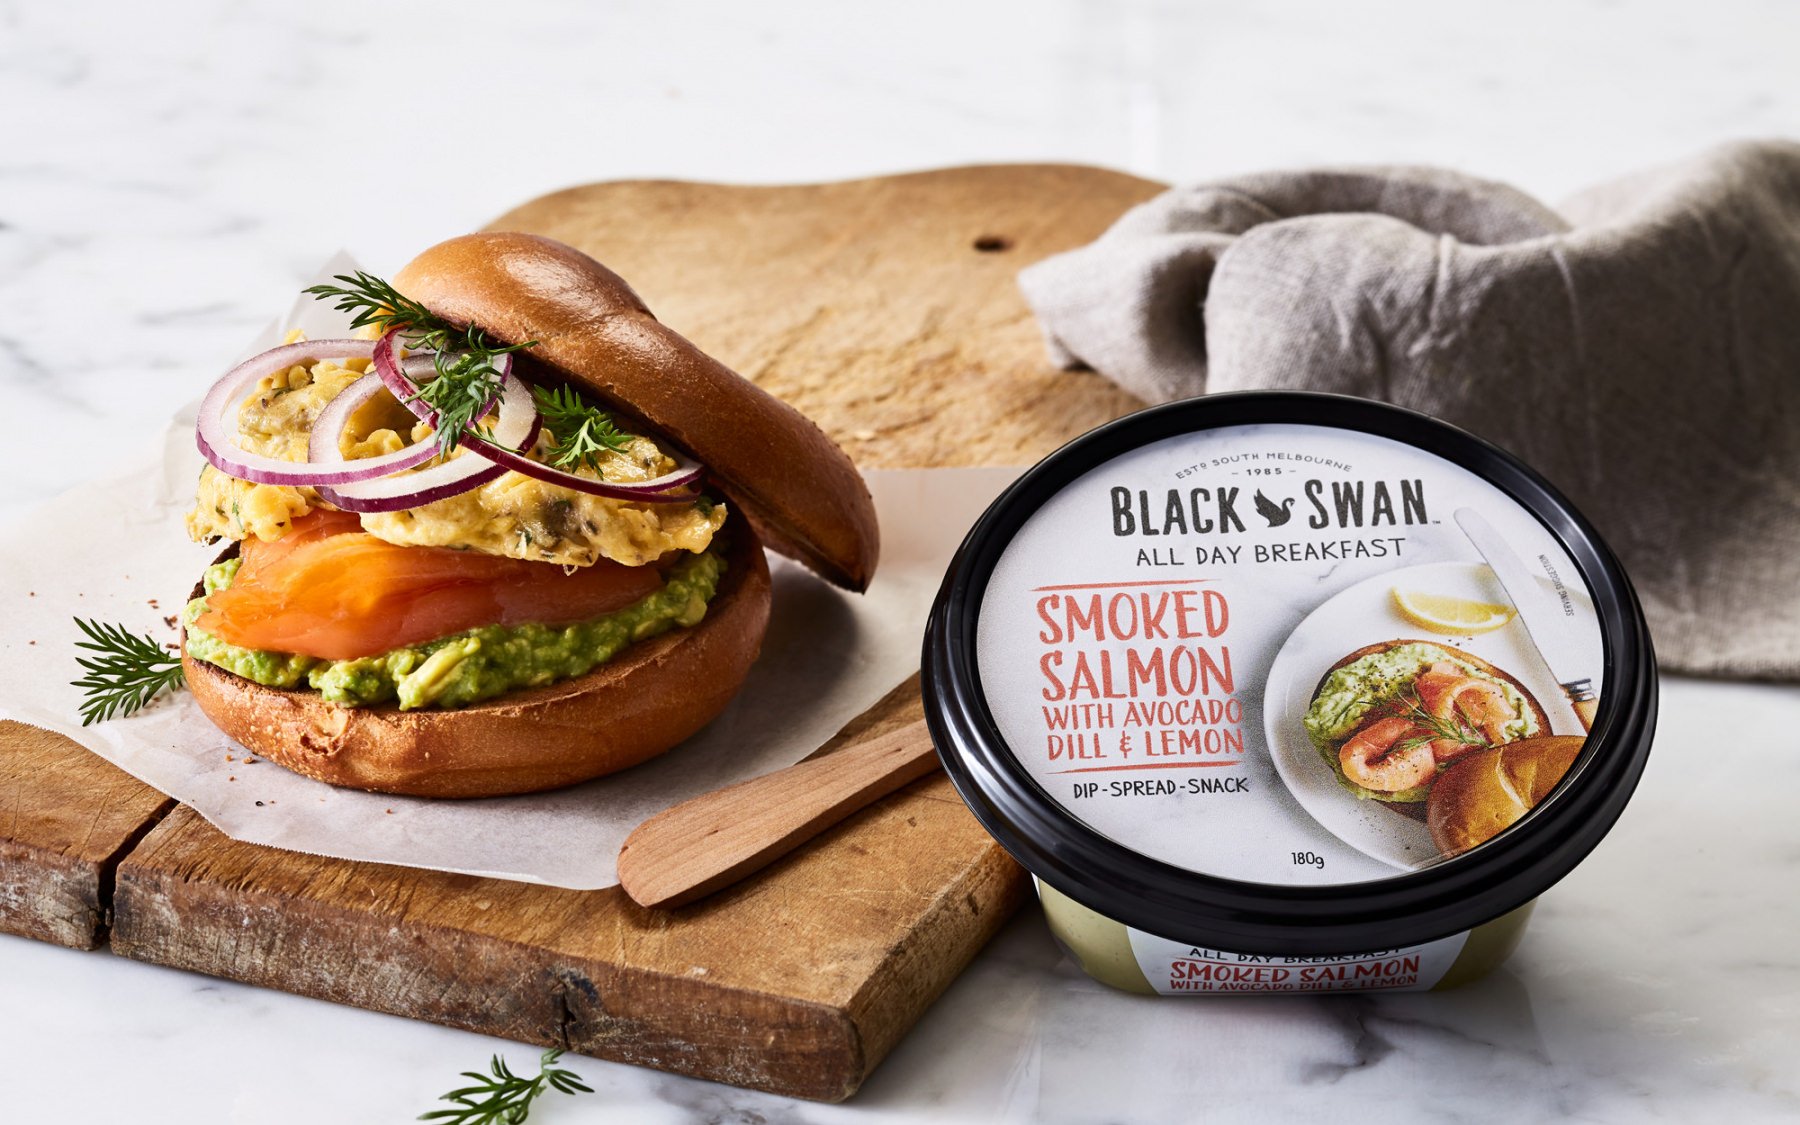 Image of a bagel with salmon and avocado next to Black Swans smoked salmon dip.